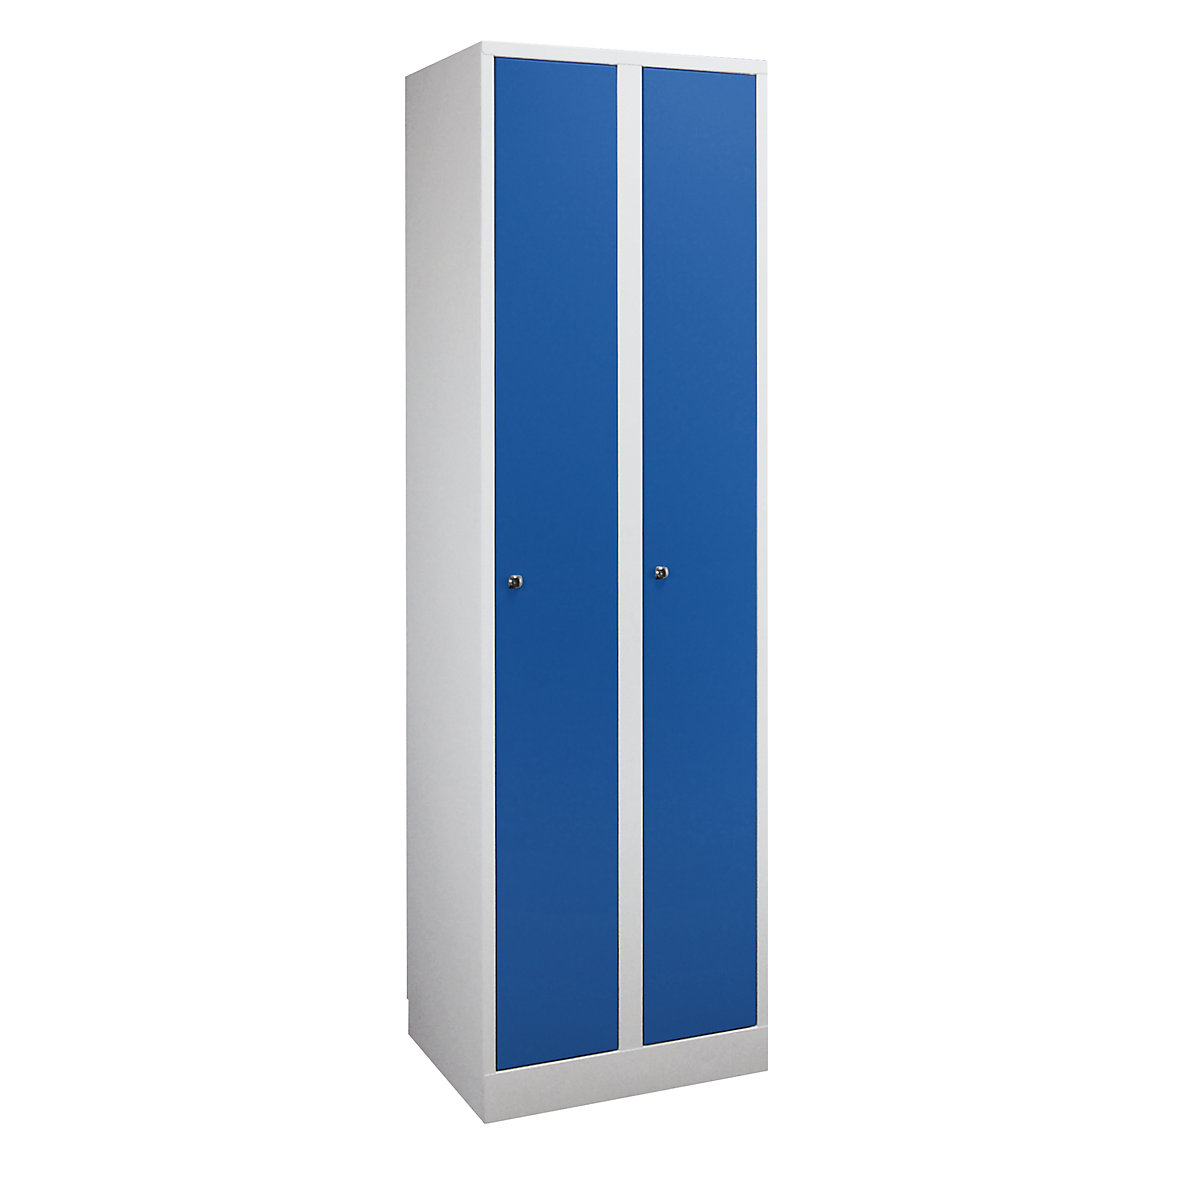 Wardrobe in practical sizes – Wolf, 2 compartments, compartment width 400 mm, light grey / gentian blue-5